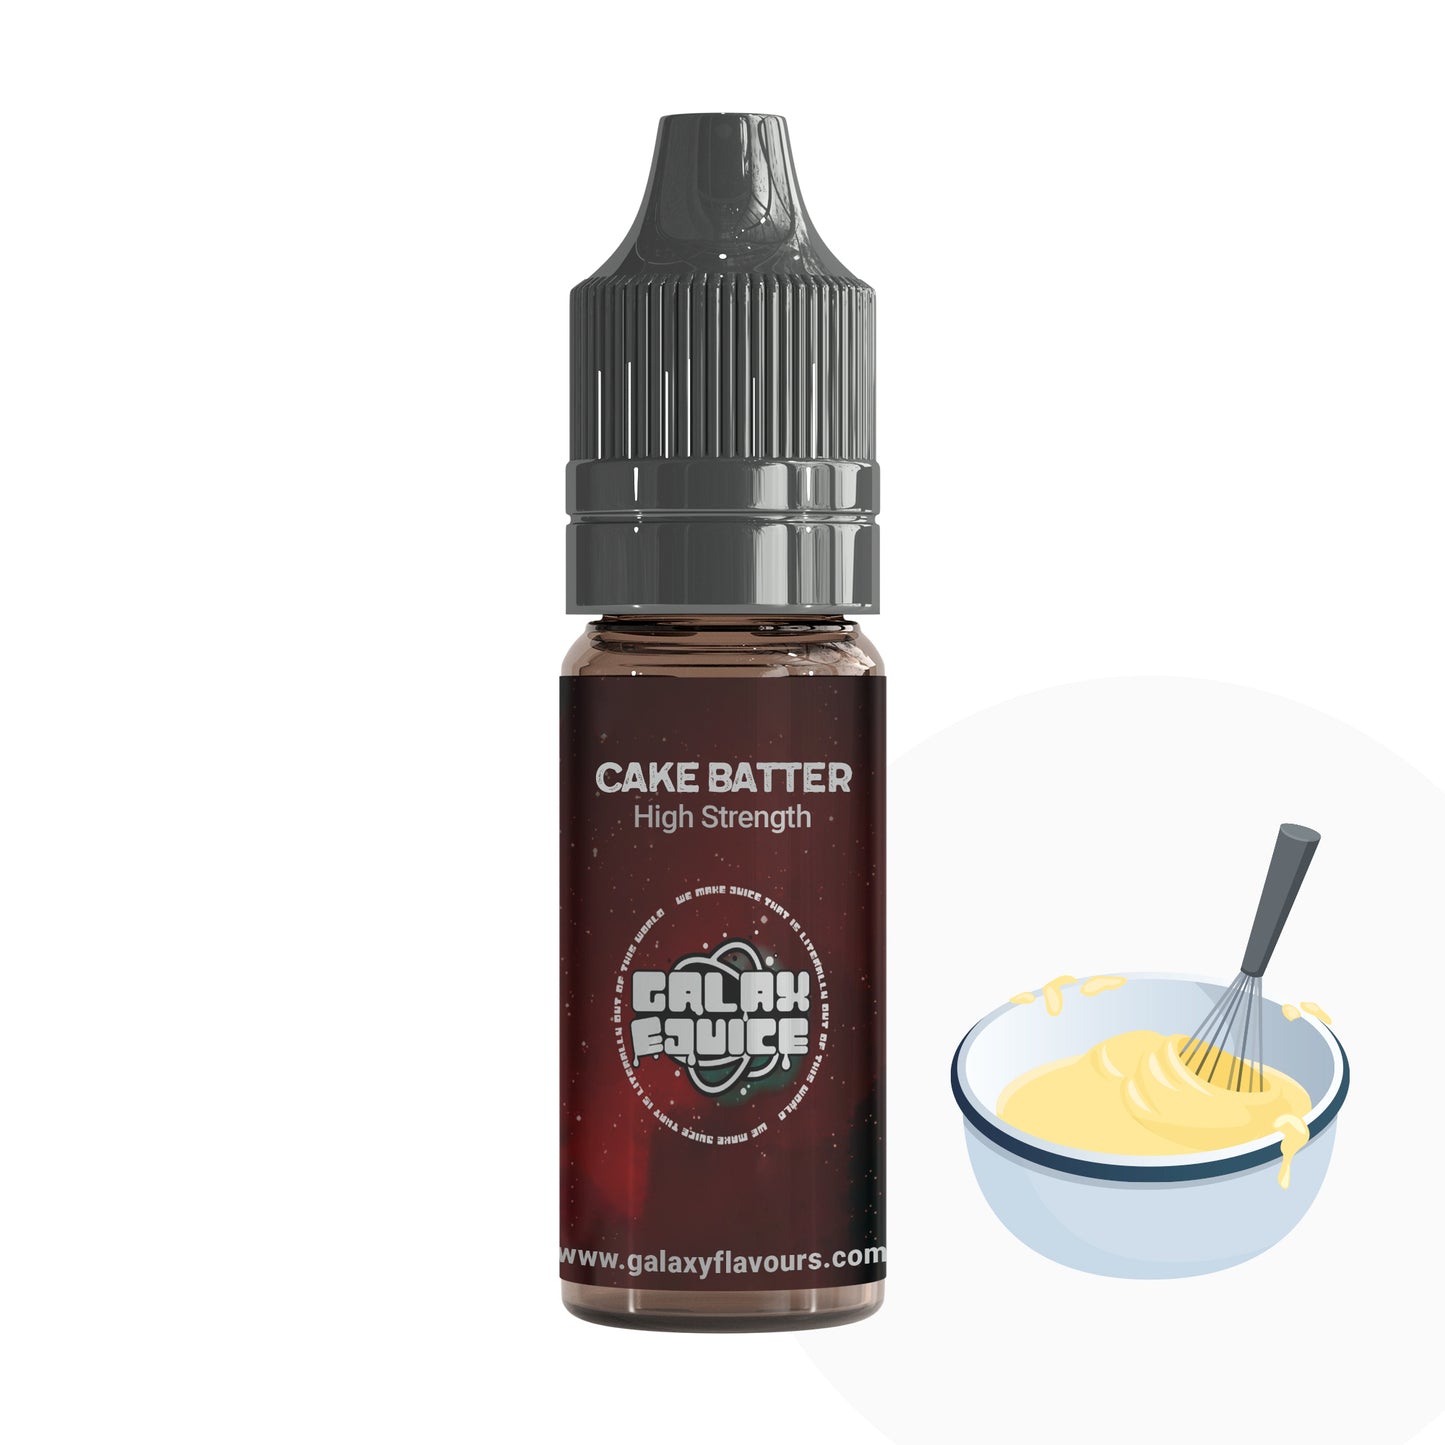 Cake Batter High Strength Professional Flavouring.